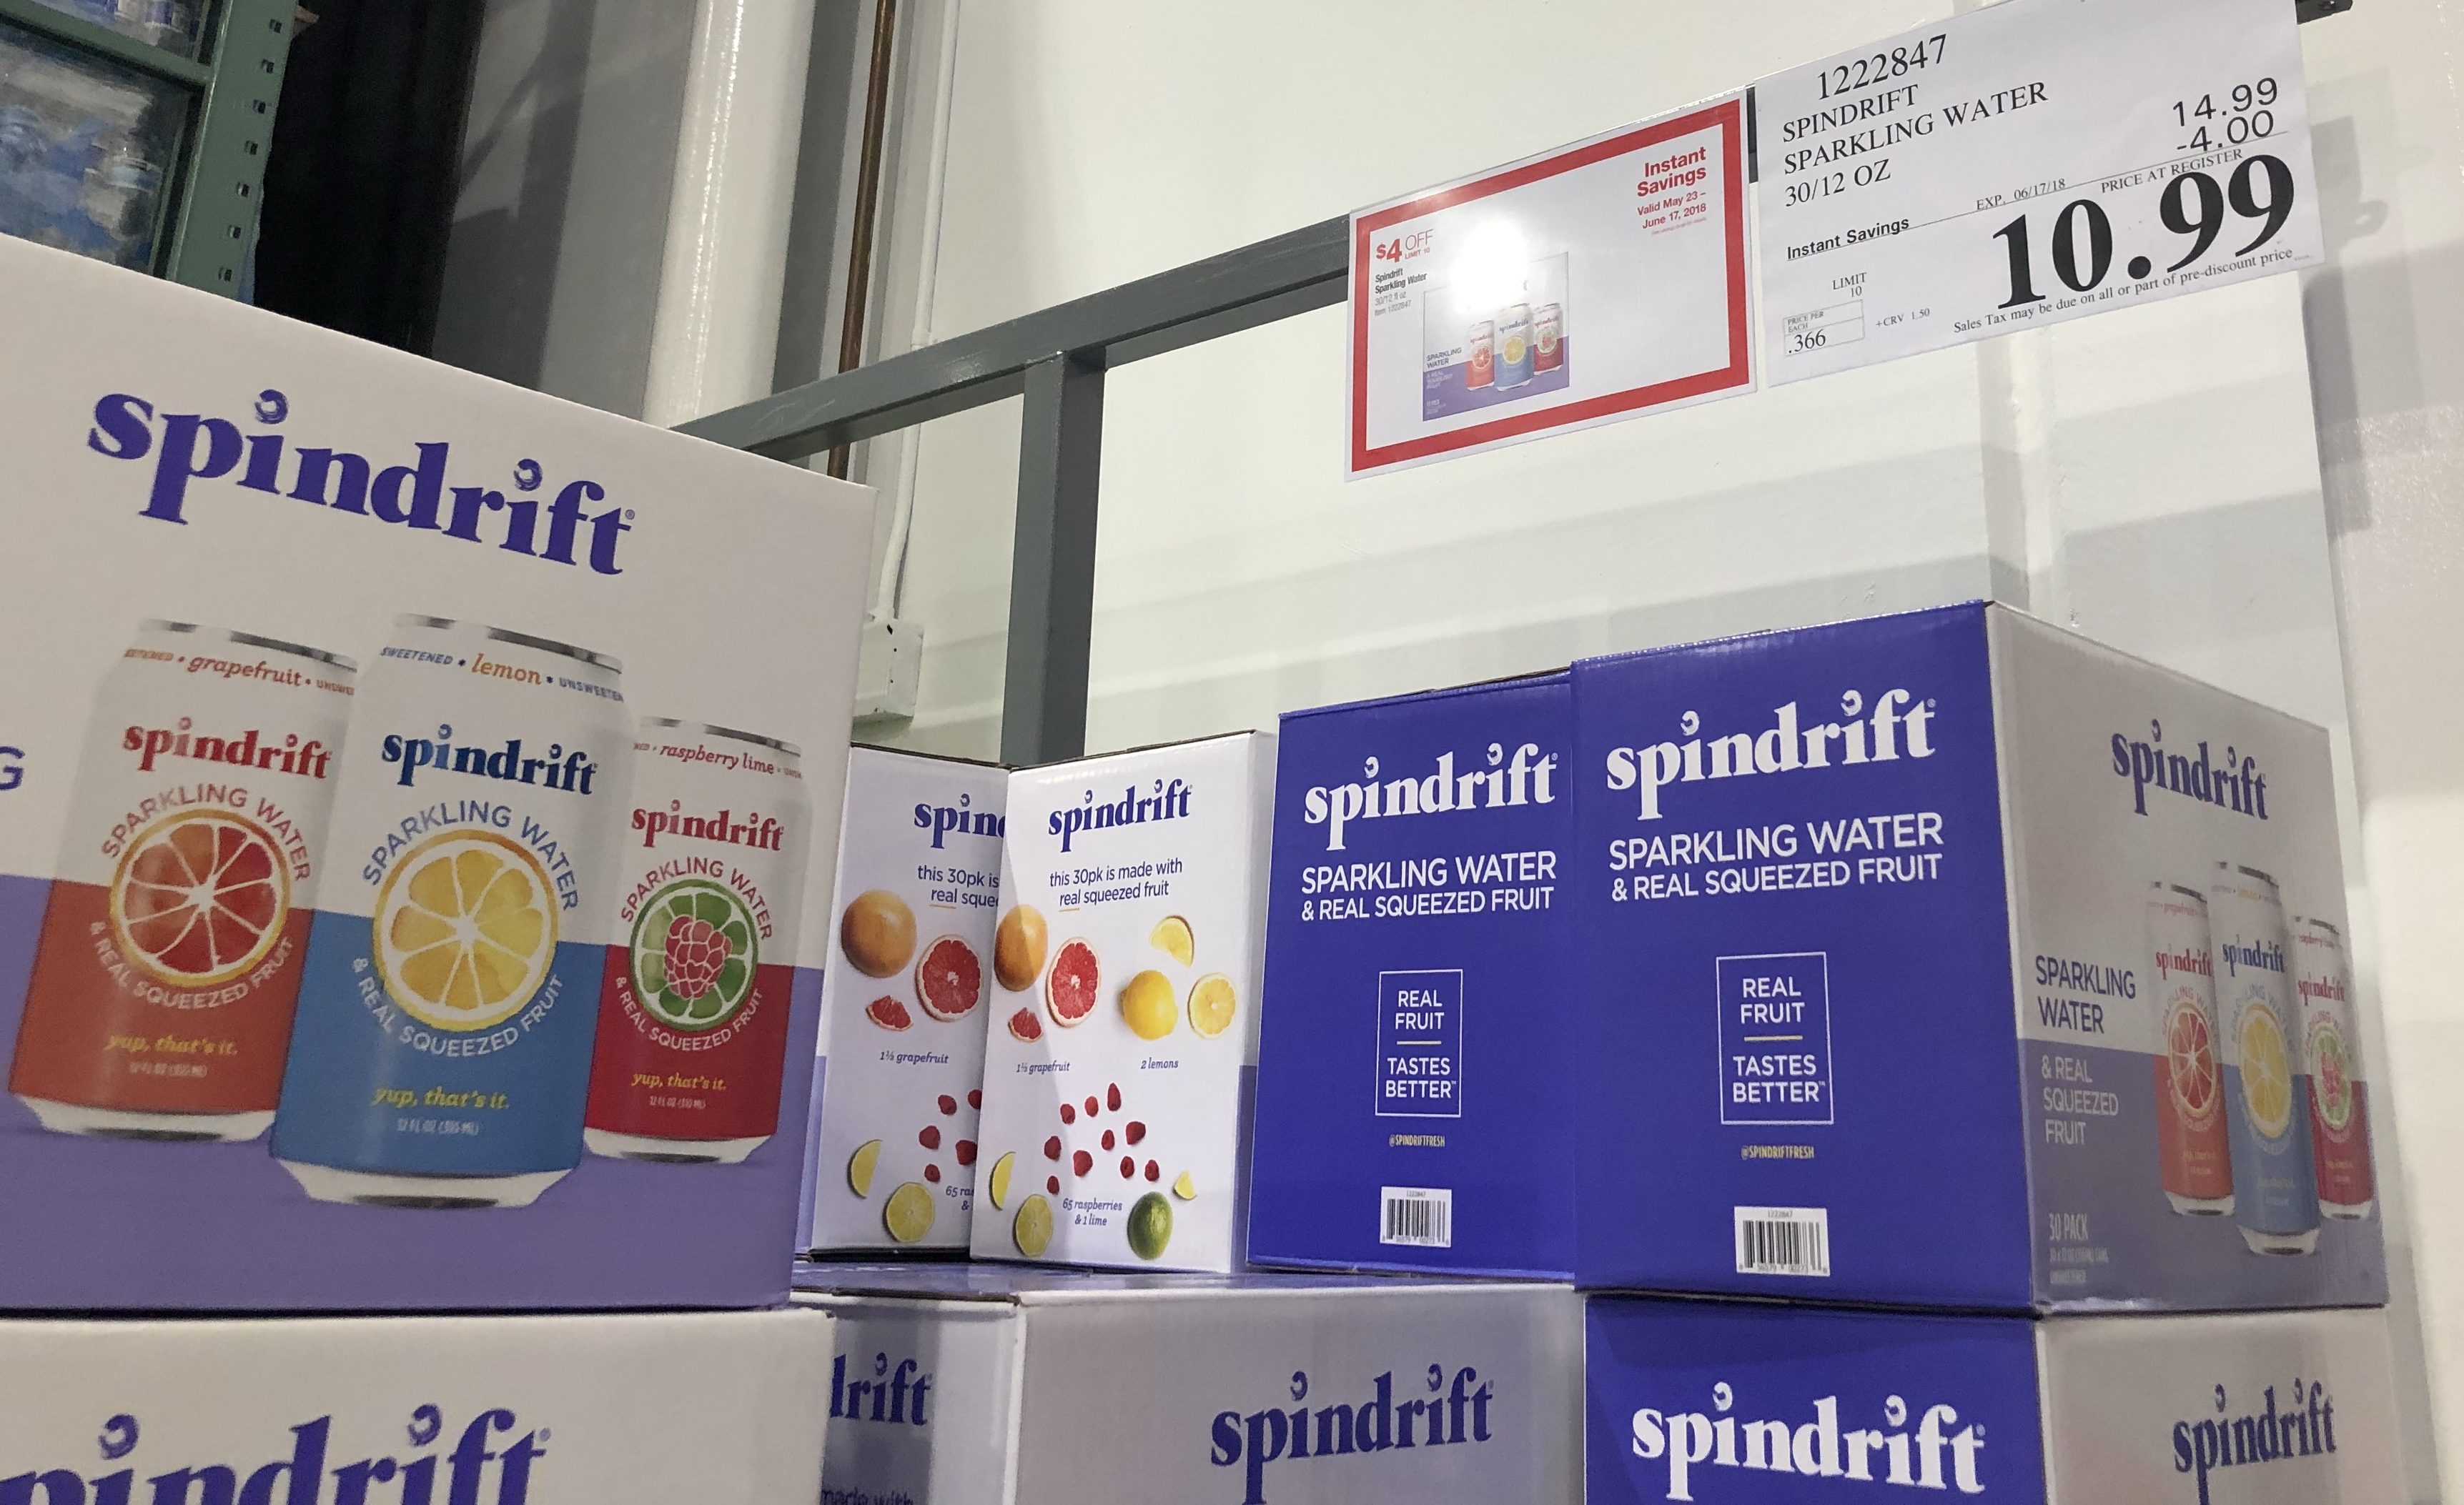 new costco instant savings deals – spindrift sparkling water 